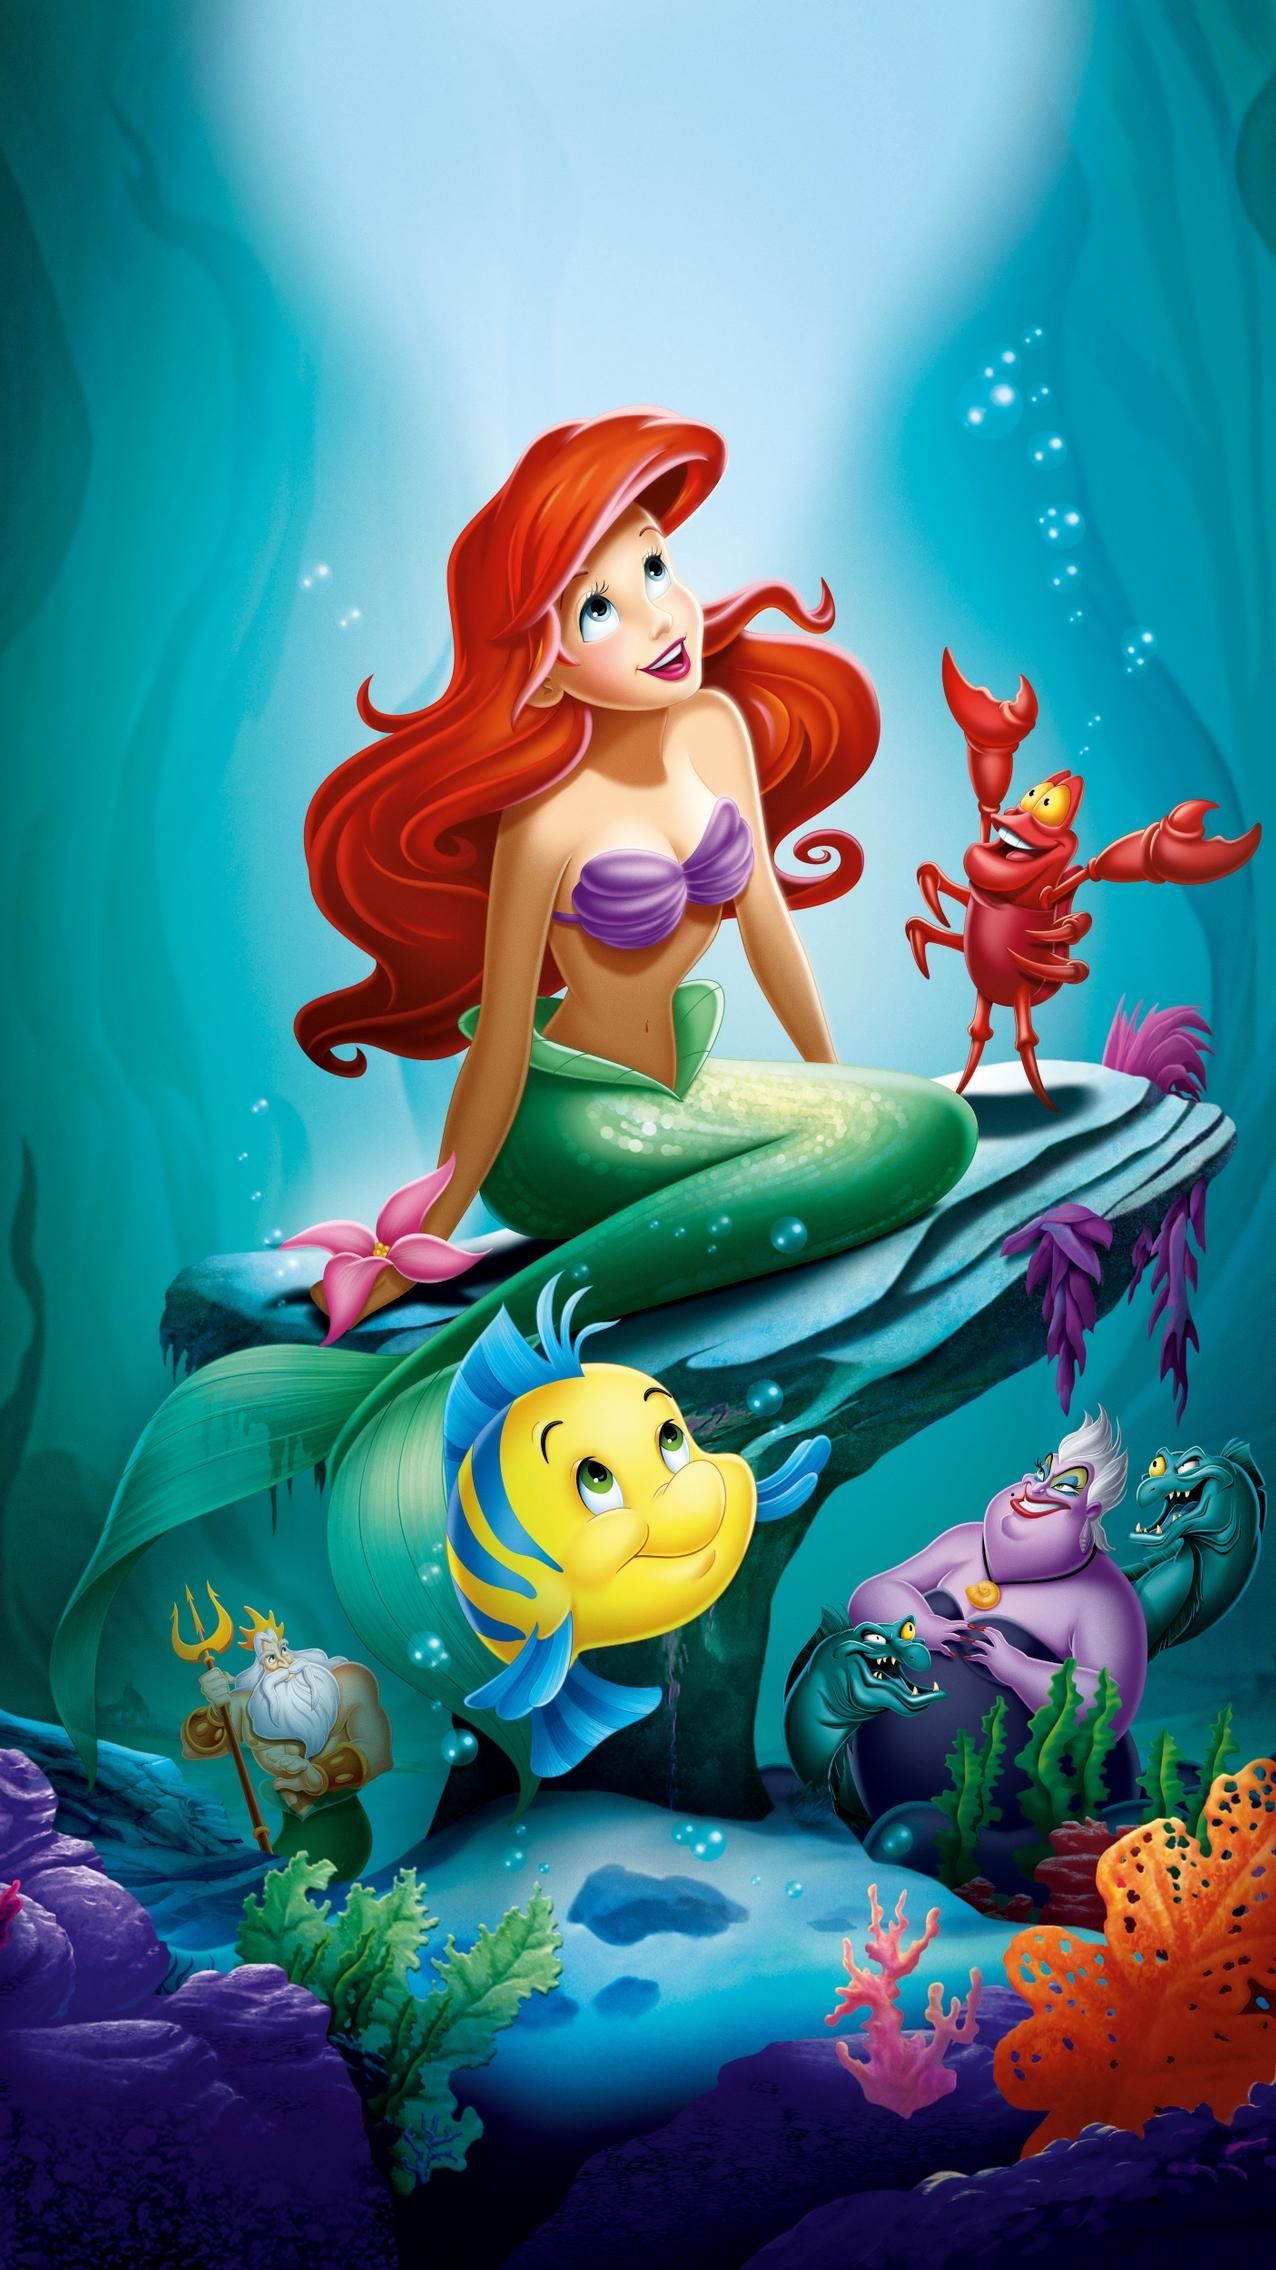 Ariel The Mermaid Background Image and Wallpaper